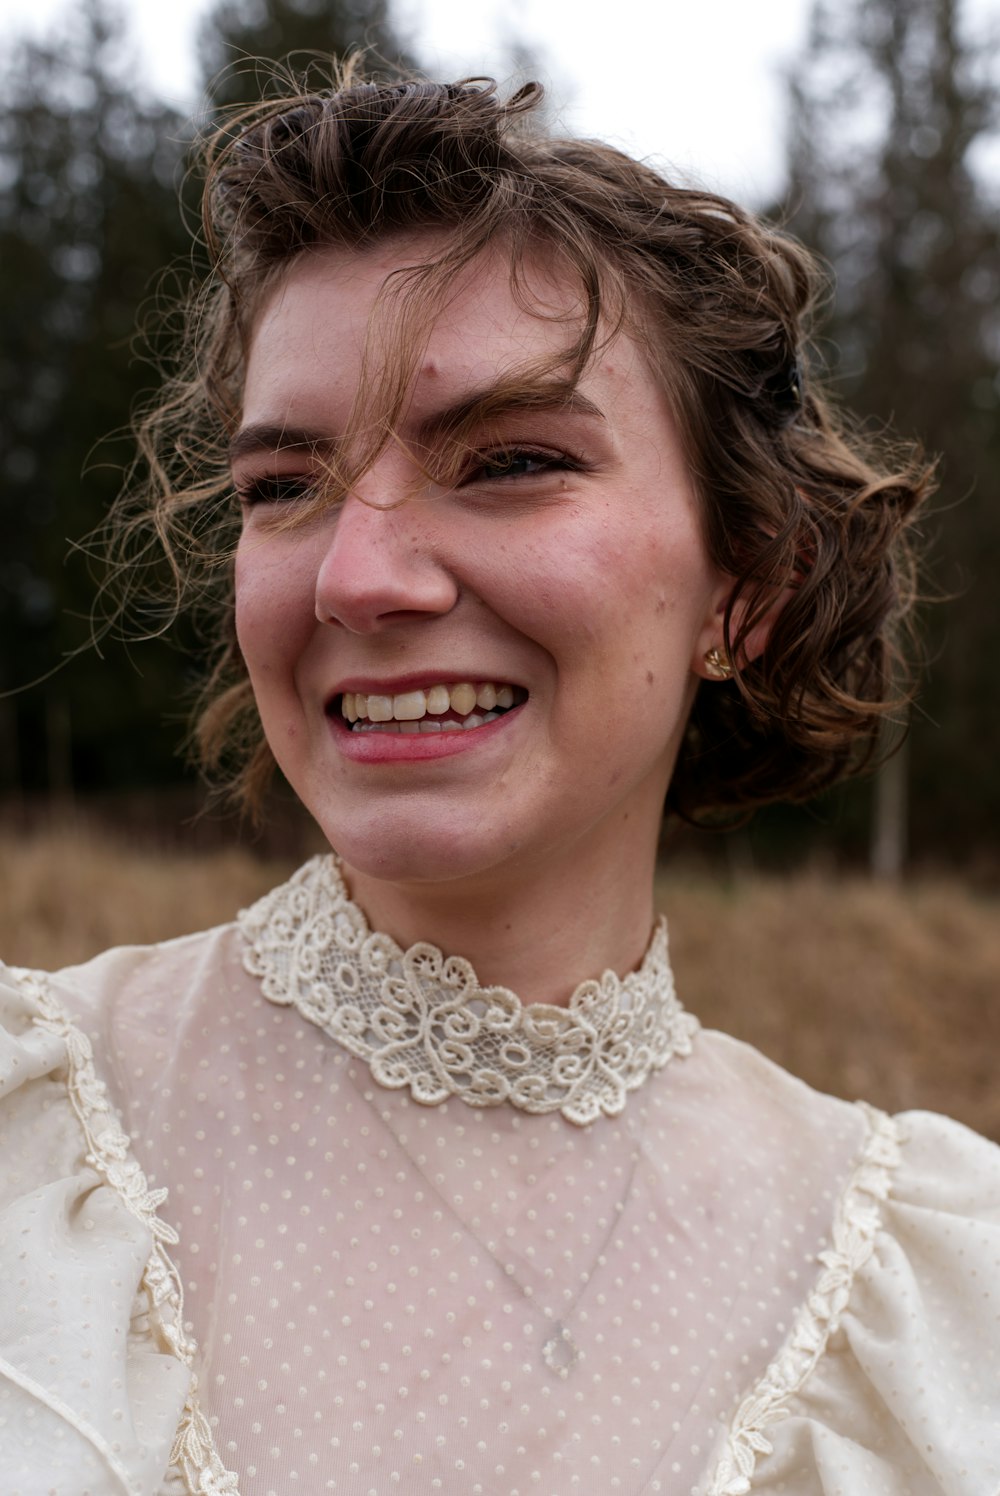 a close up of a person wearing a dress and smiling